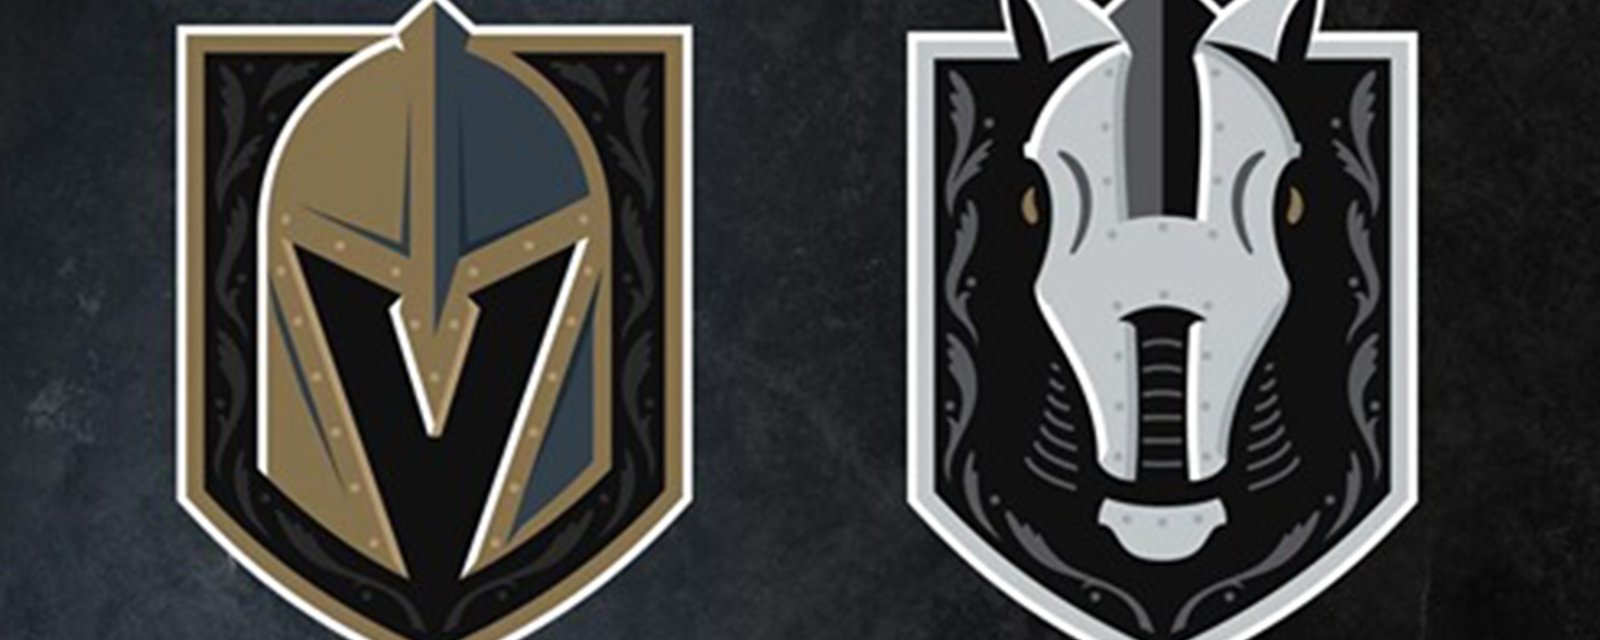 Vegas' AHL team, the Silver Knights, reveal their incredible new jerseys